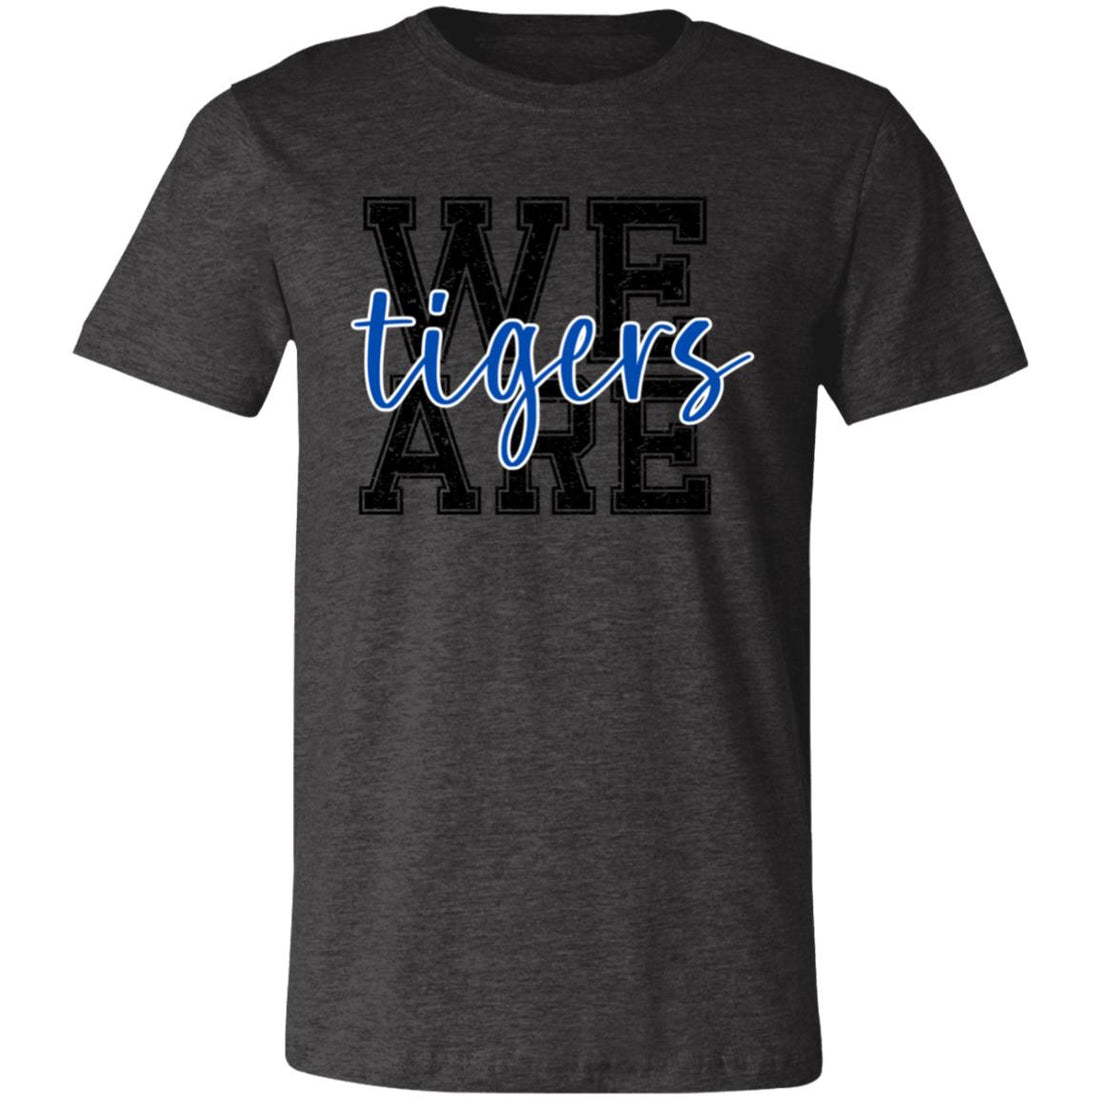 We Are Tigers Unisex Jersey Short-Sleeve T-Shirt - T-Shirts - Positively Sassy - We Are Tigers Unisex Jersey Short-Sleeve T-Shirt